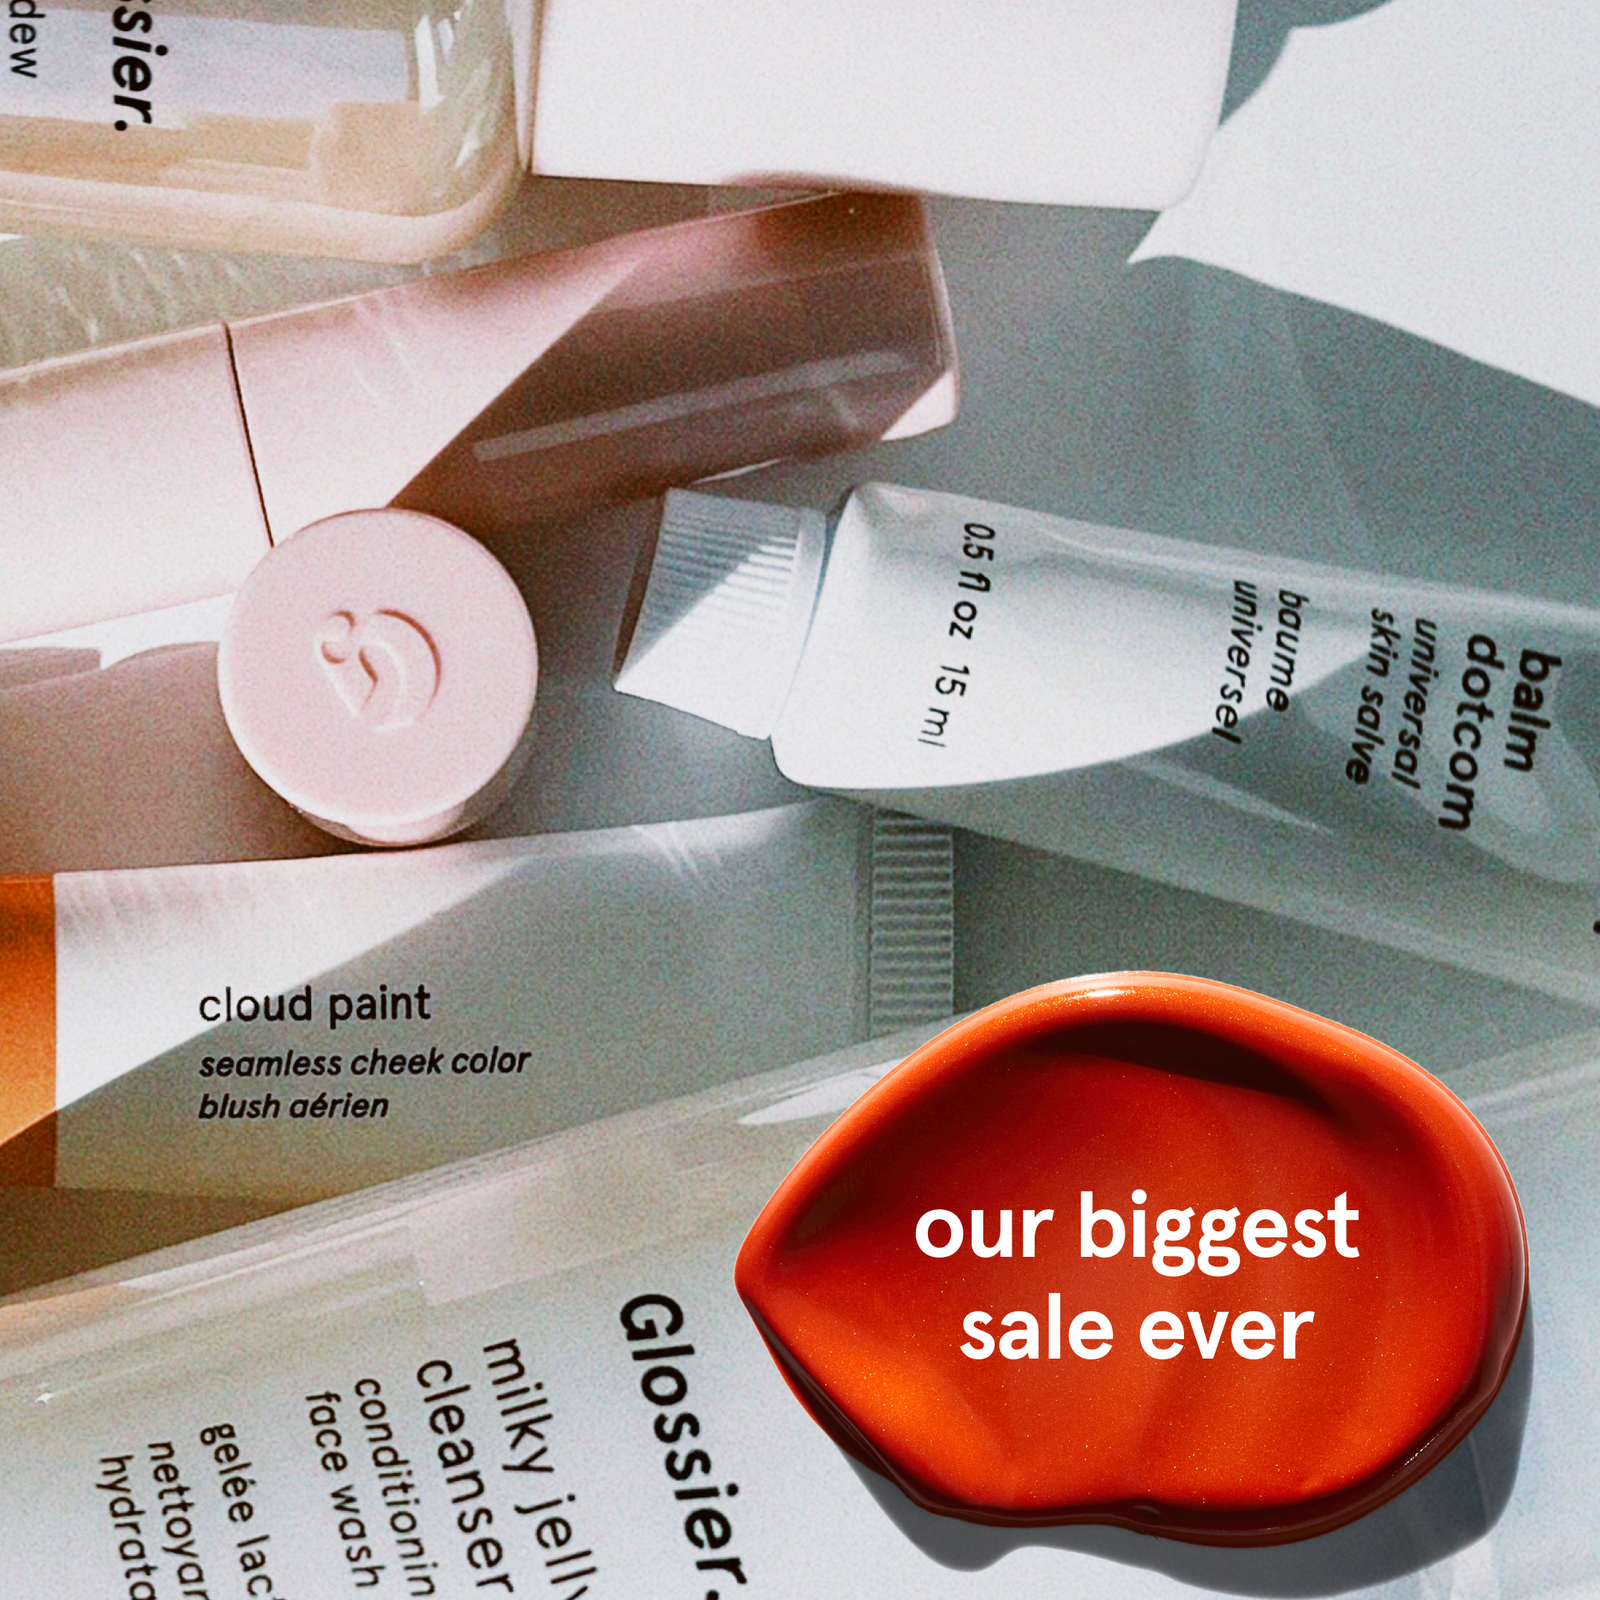 All of Glossier’s Products Are 25% Off Right Now